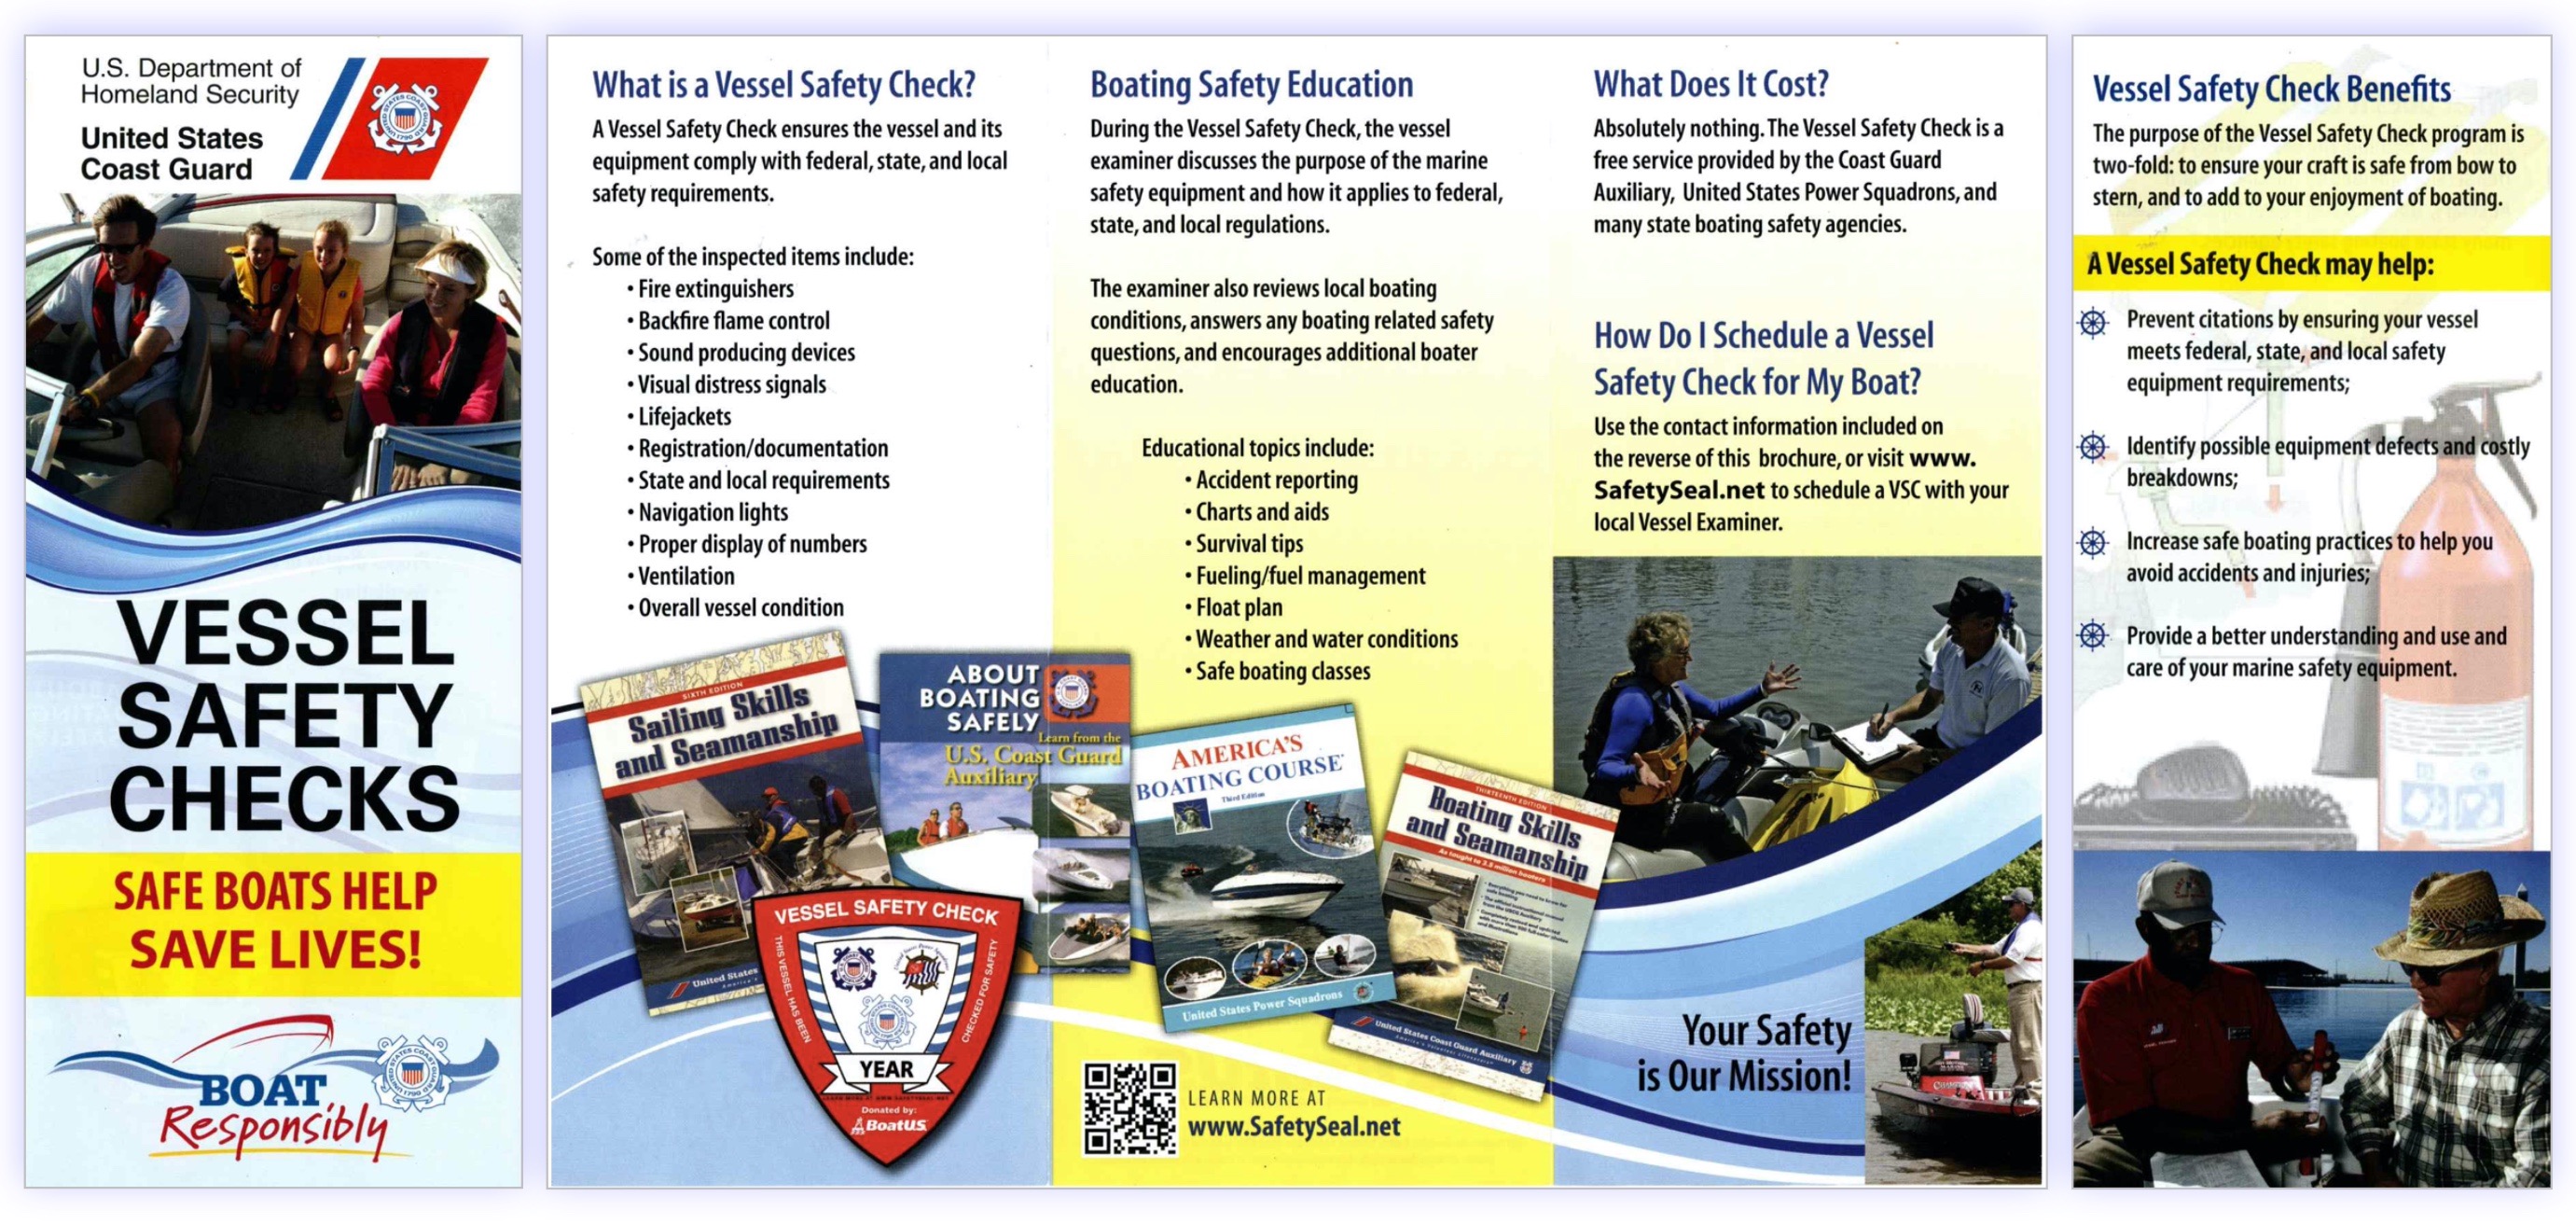 Pictured is the Vessel Safety Check brochure describing the program.